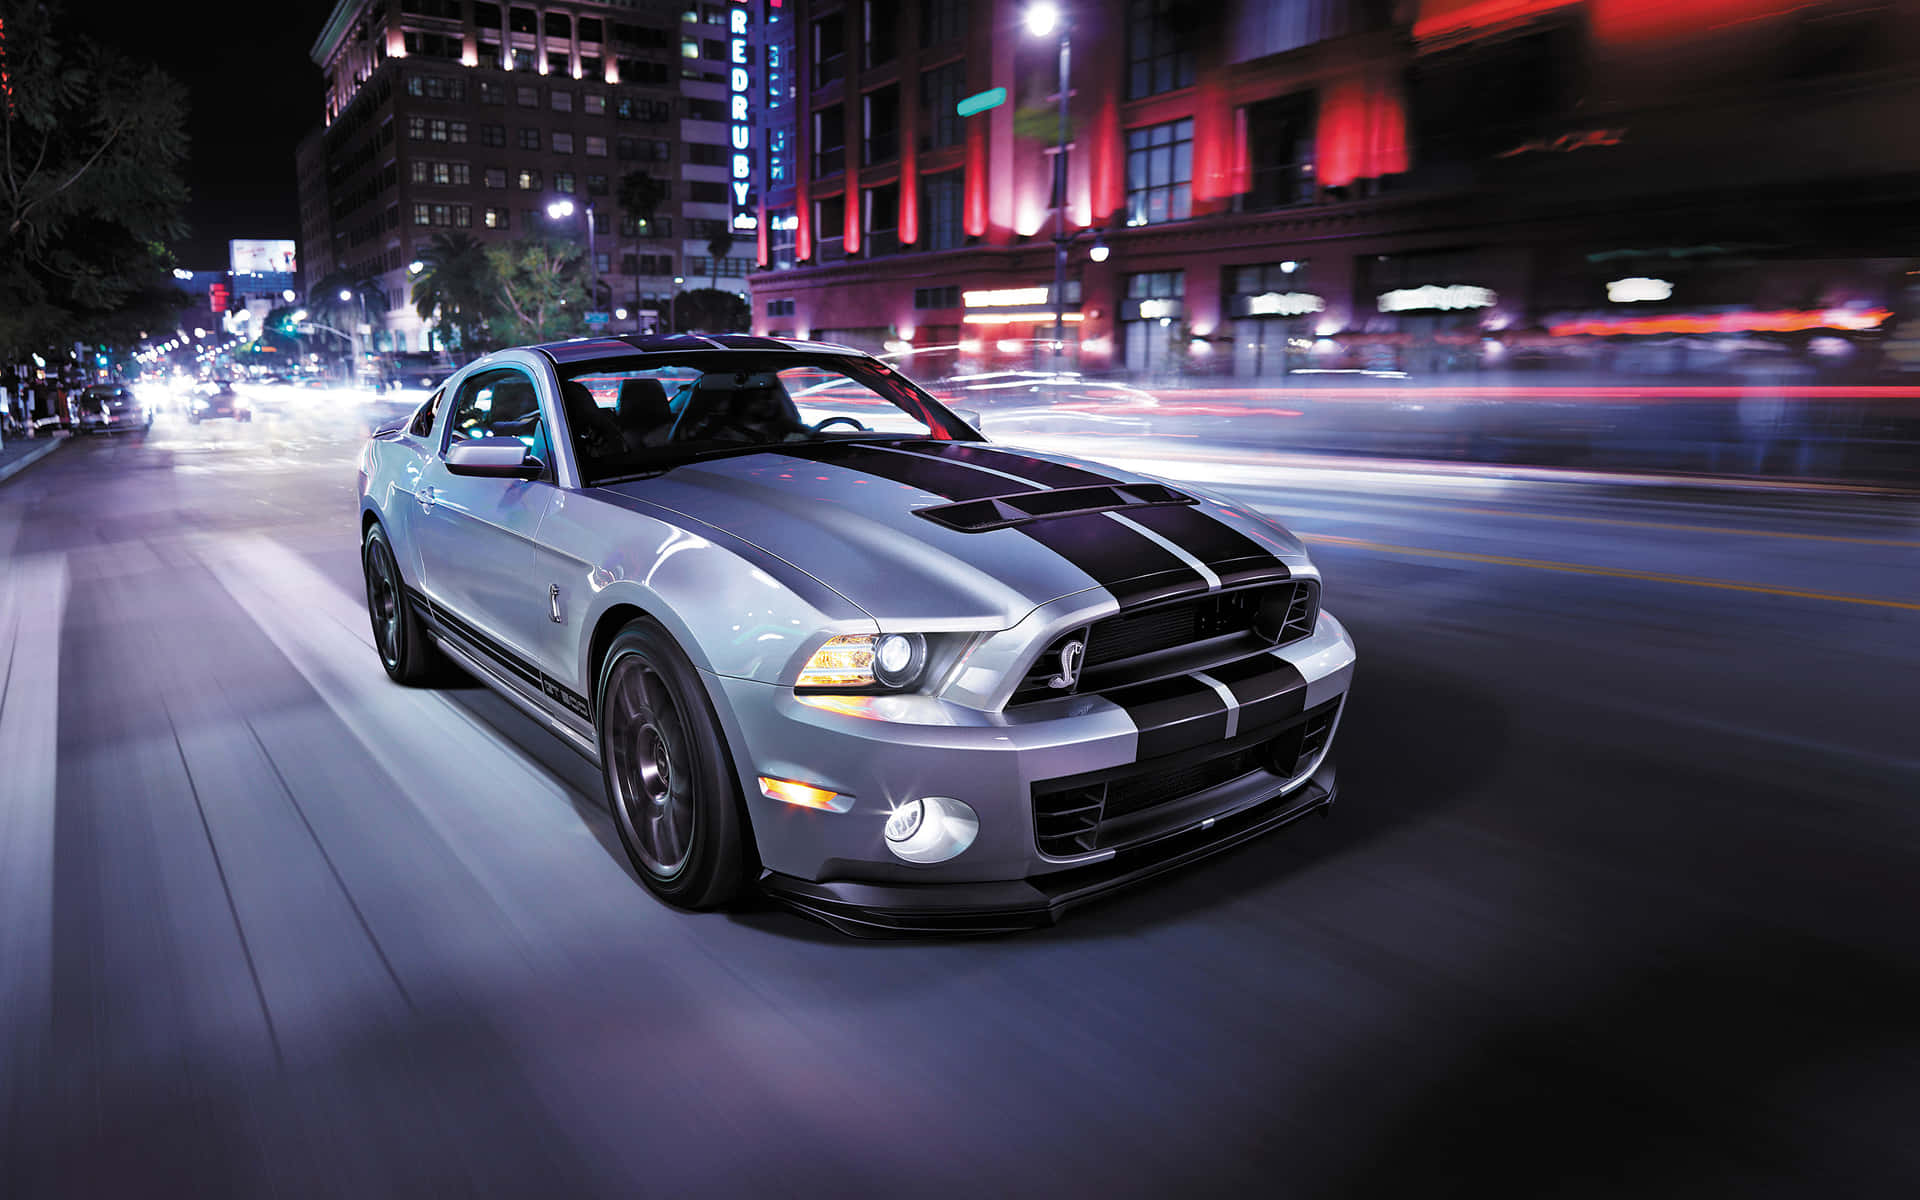 2014 Shelby Ford Mustang Car Wallpaper